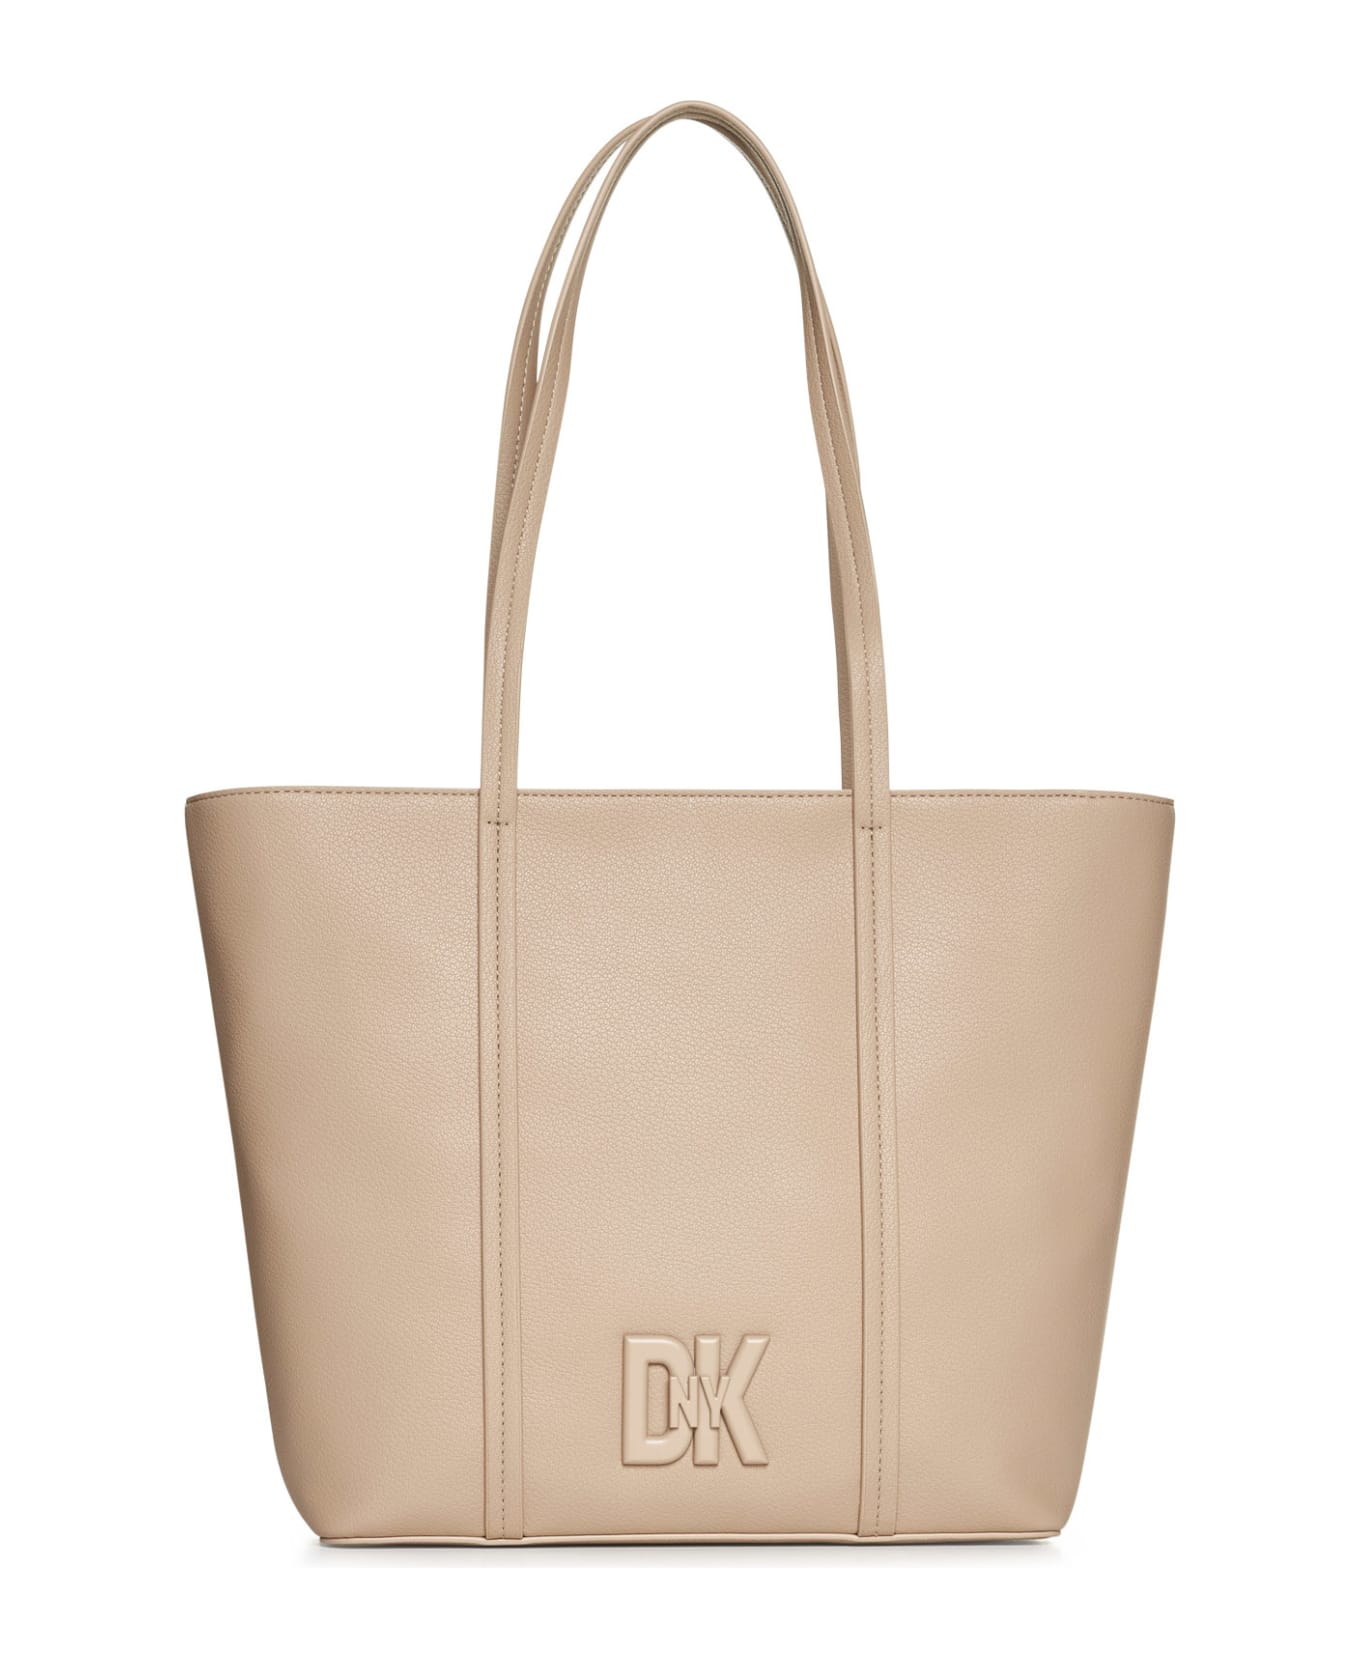 DKNY Tote - Neutral トートバッグ